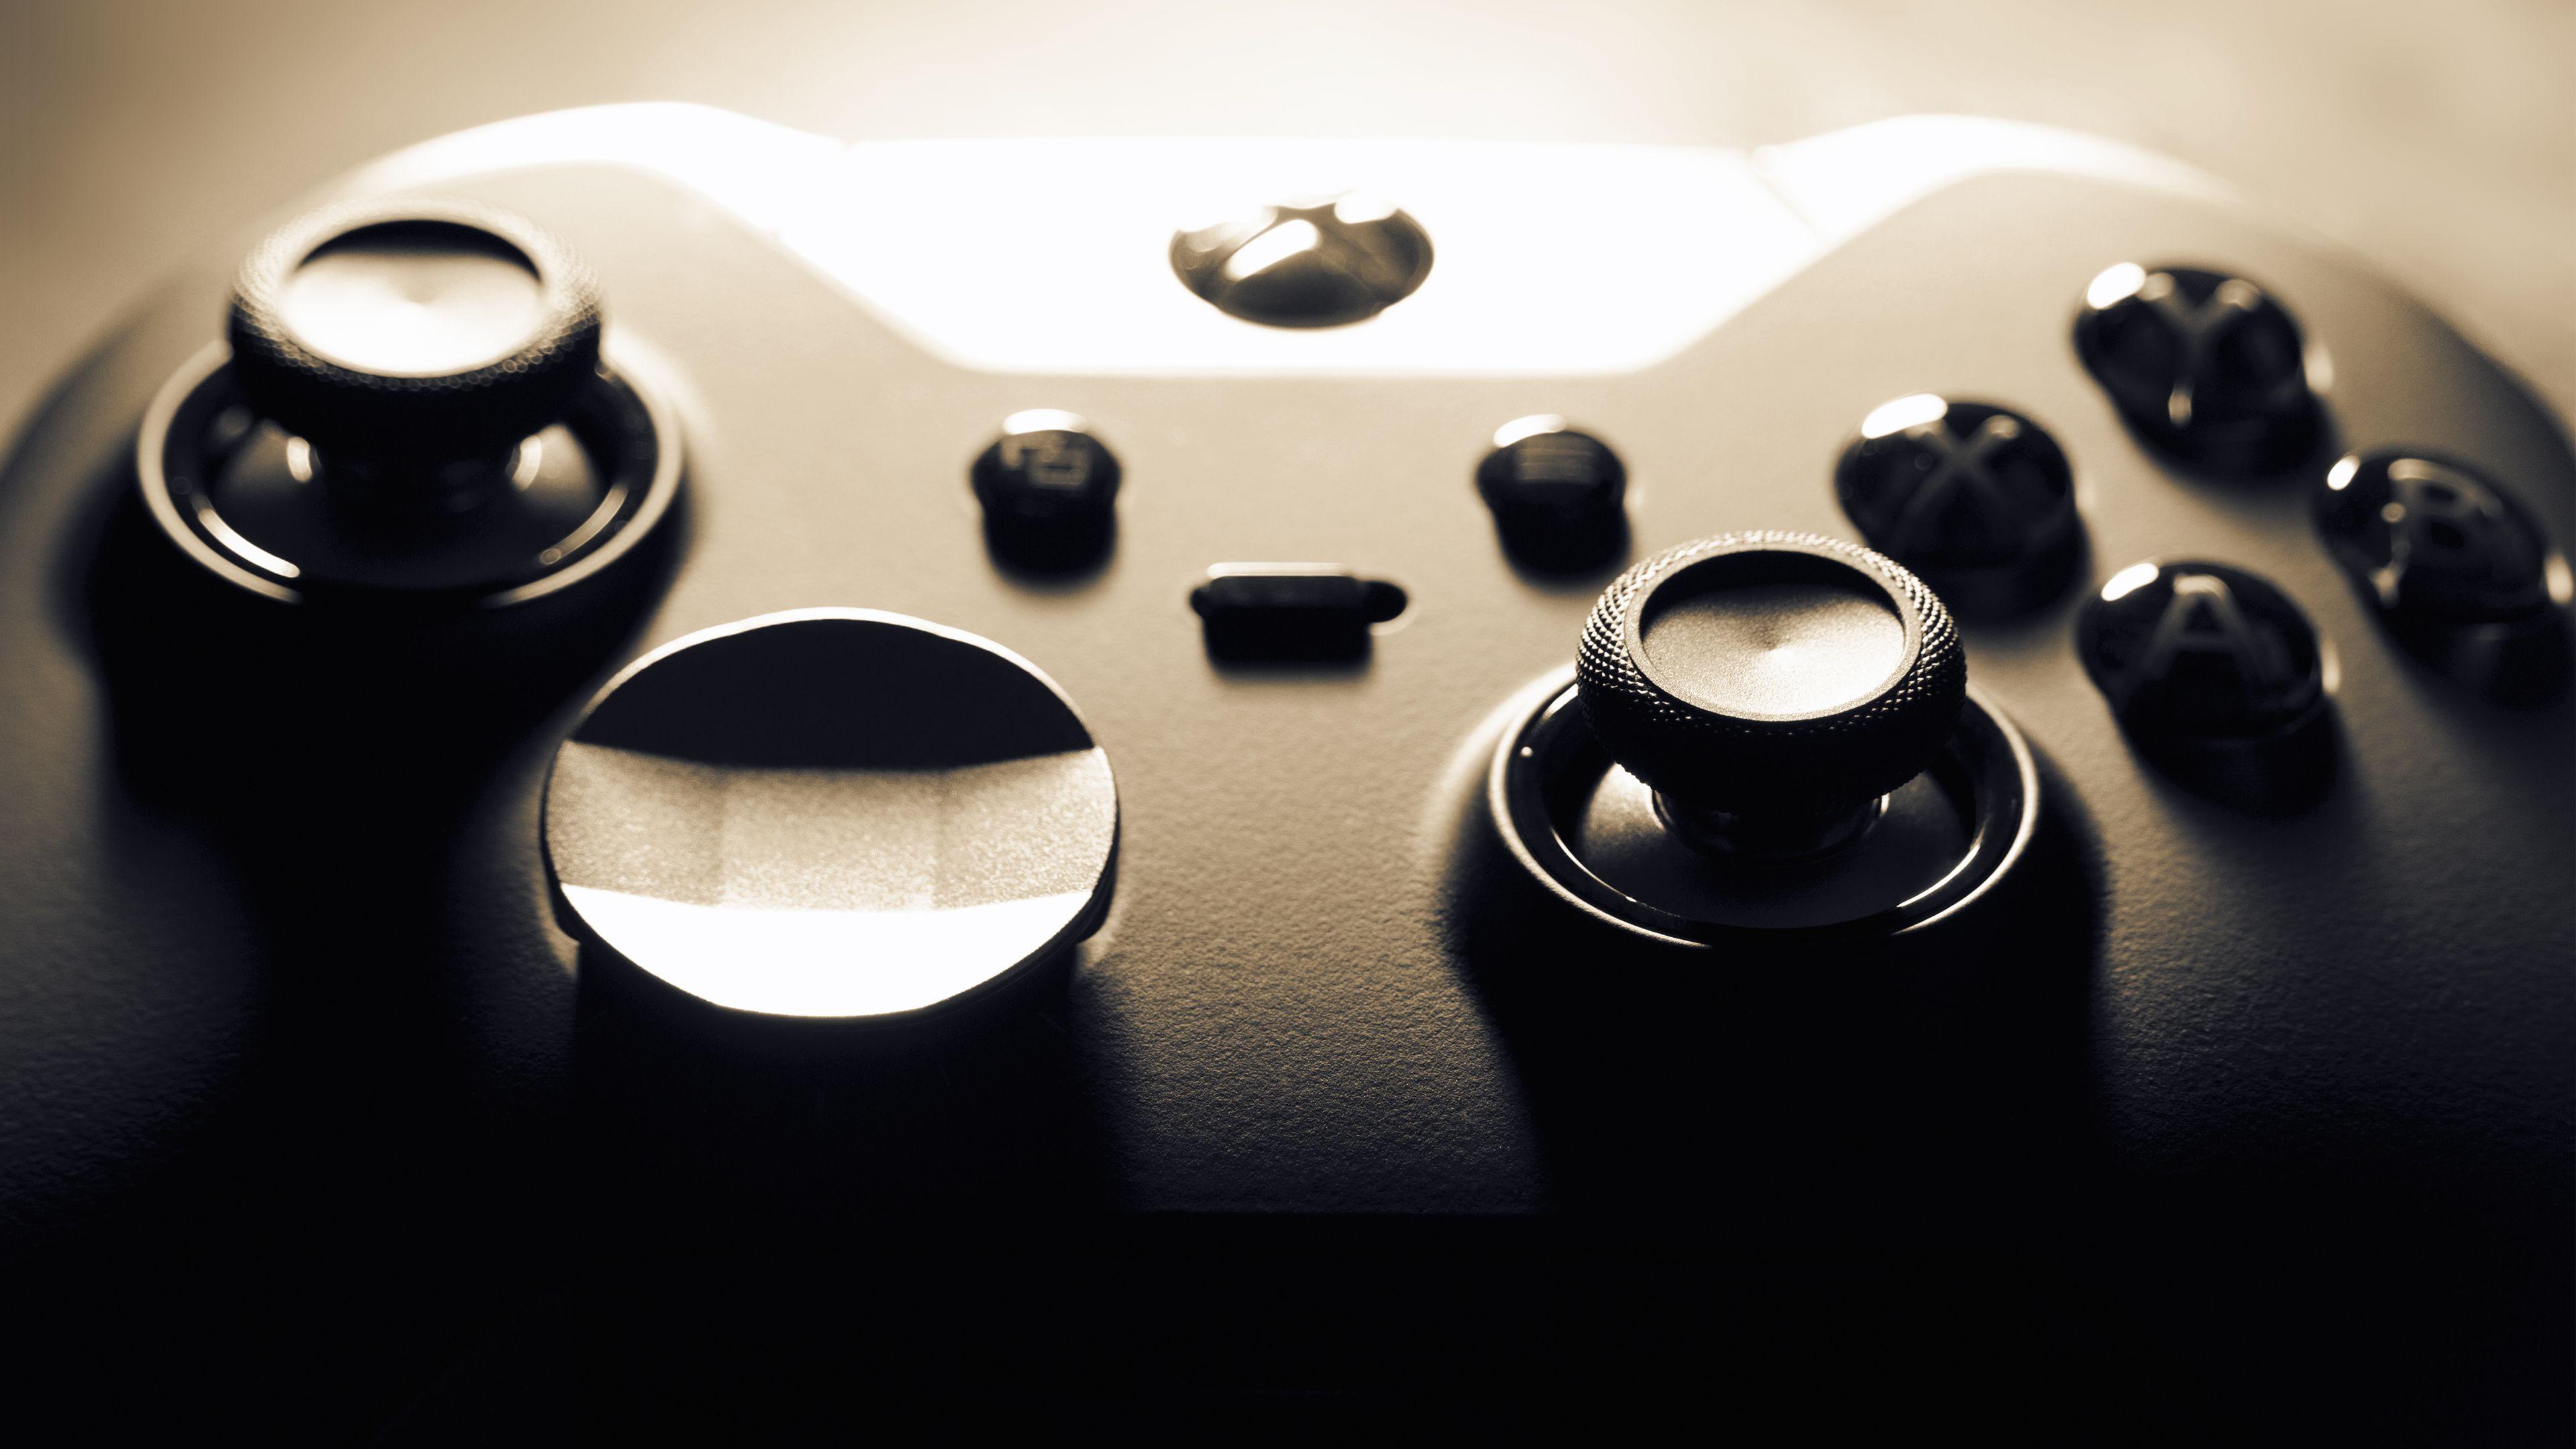 Xbox One Game Console 4K wallpaper download